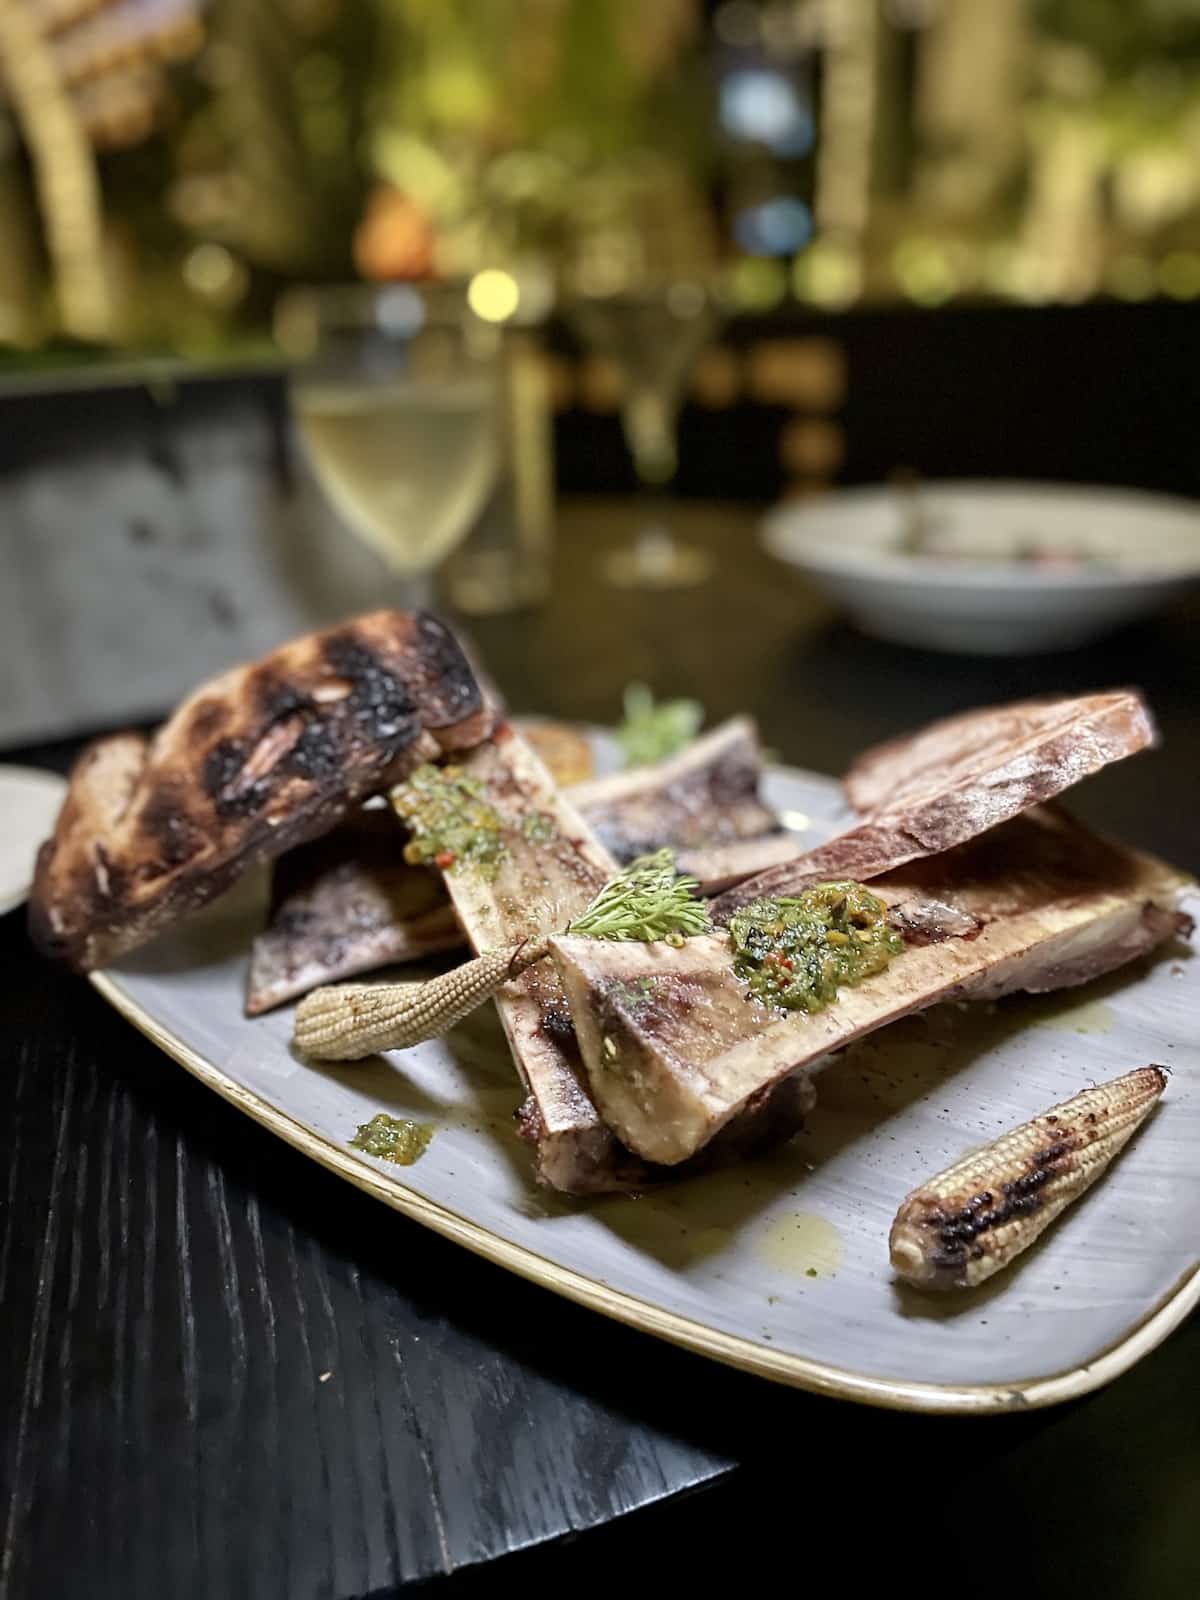 Plate with bone marrow, corn, and toasts.